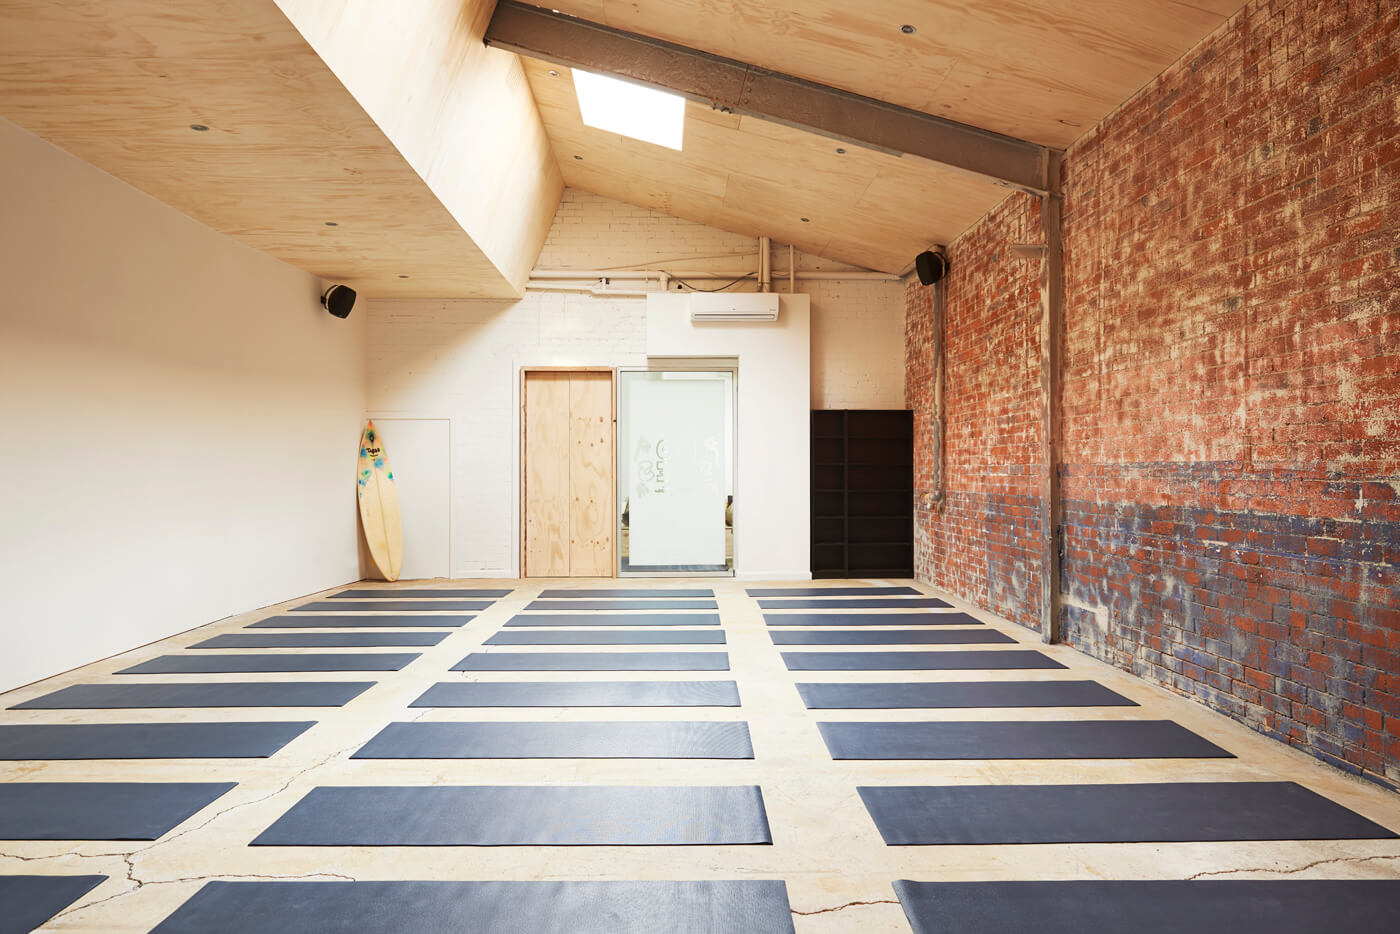 A yoga studio in the making - How to Open a Yoga Studio